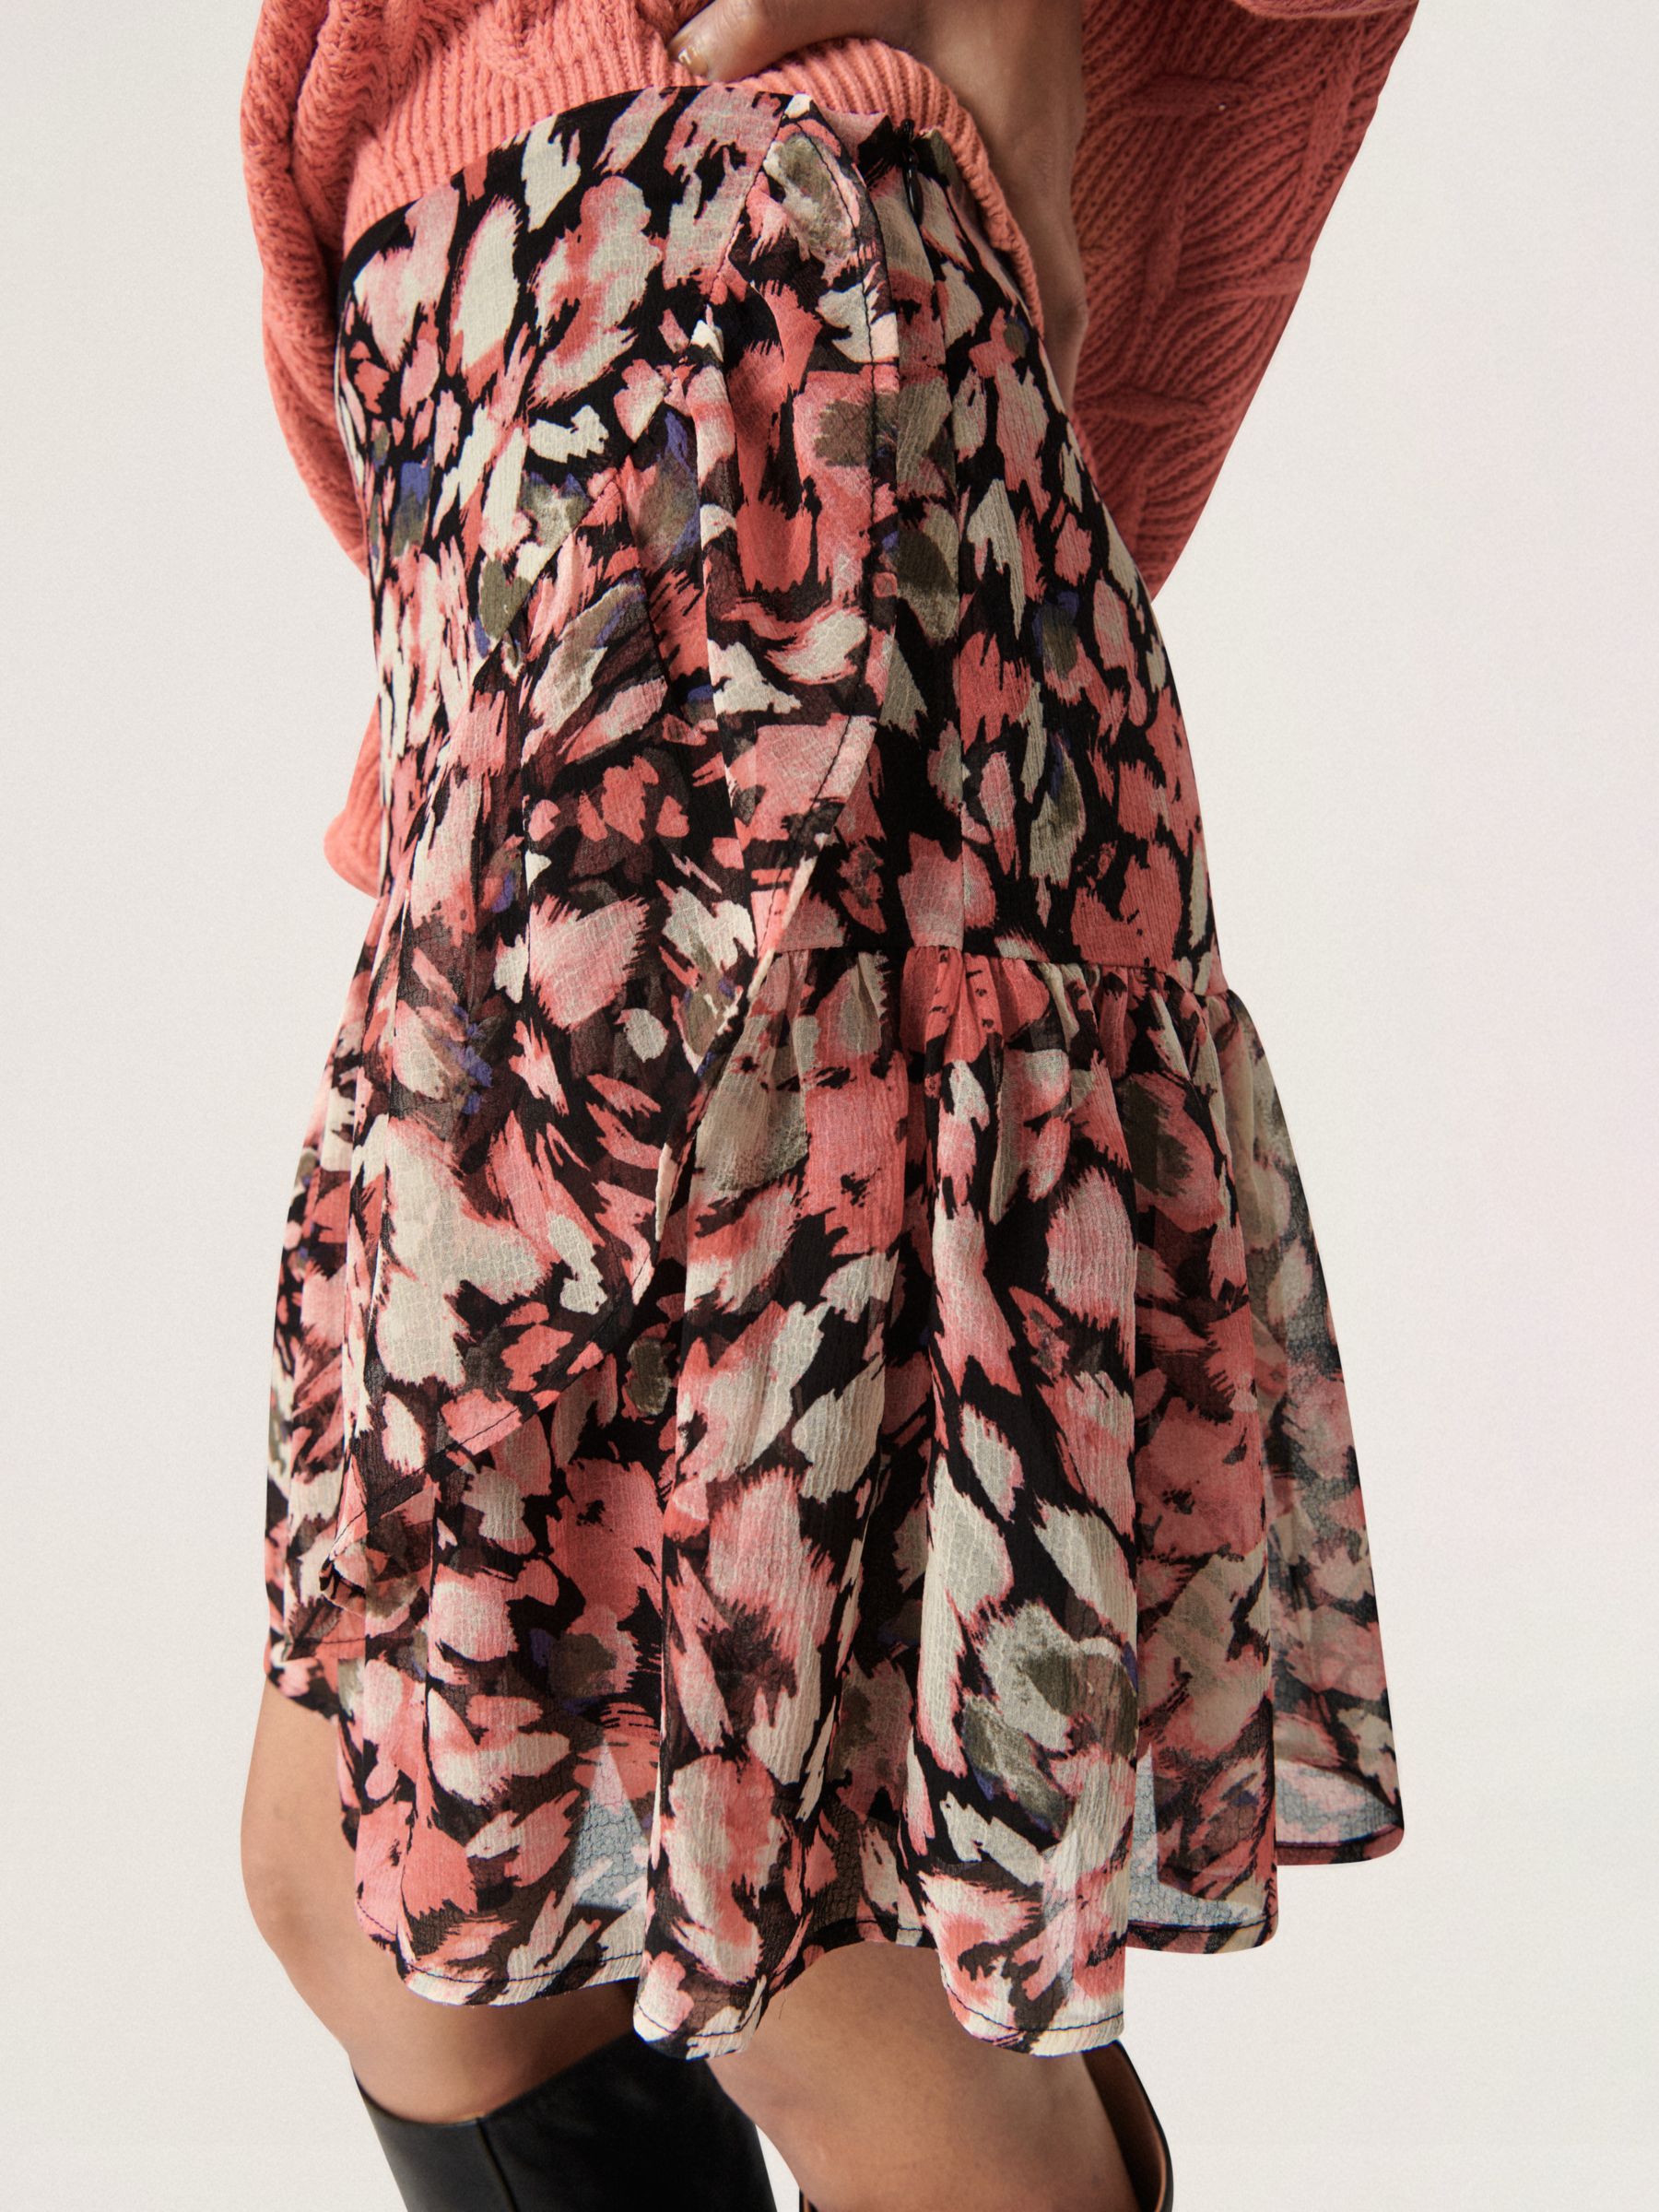 Buy Soaked In Luxury Luciana Mini Skirt, Faded Rose Online at johnlewis.com